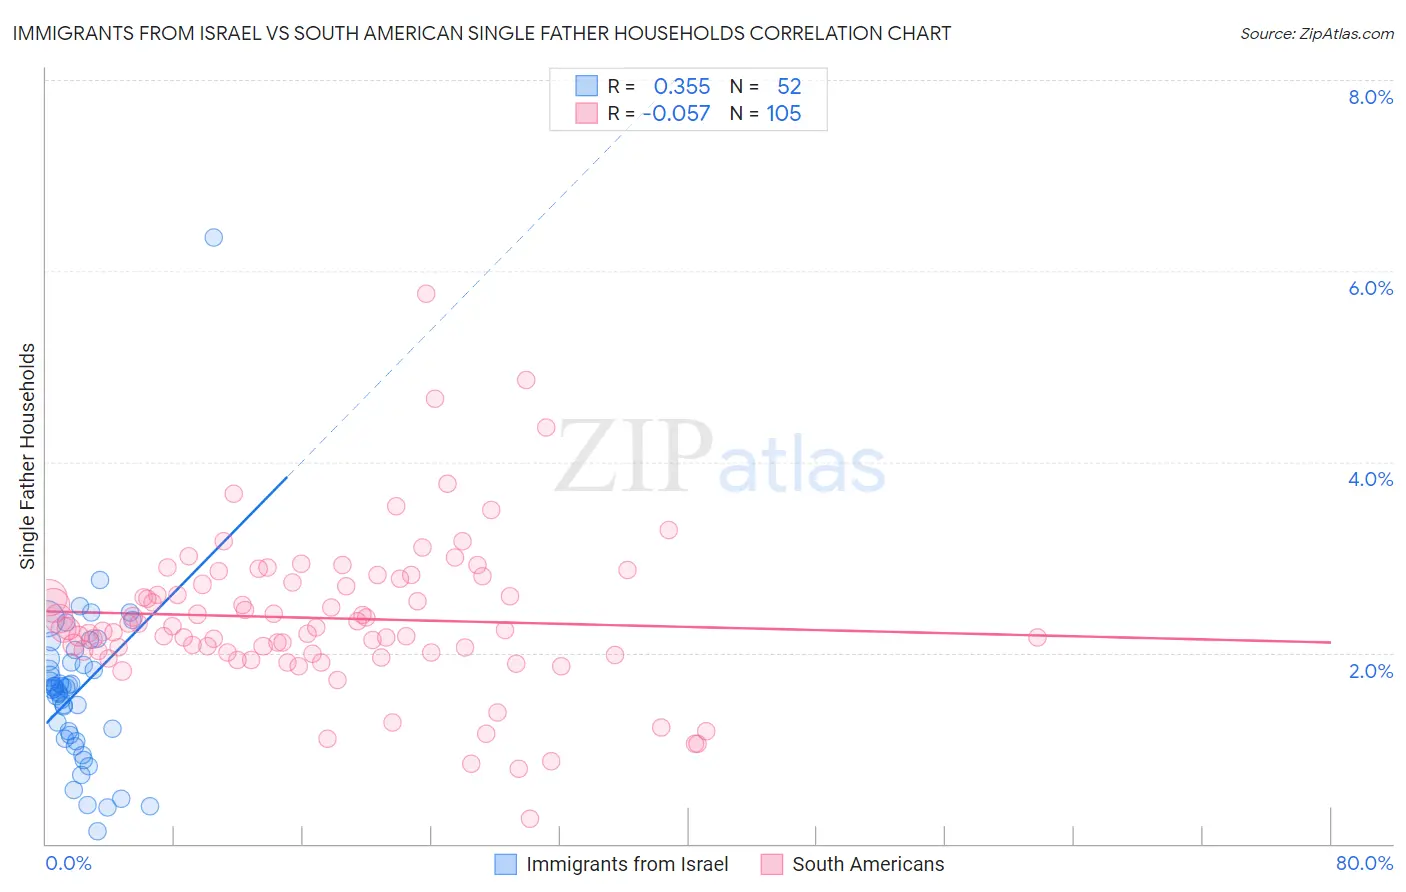 Immigrants from Israel vs South American Single Father Households